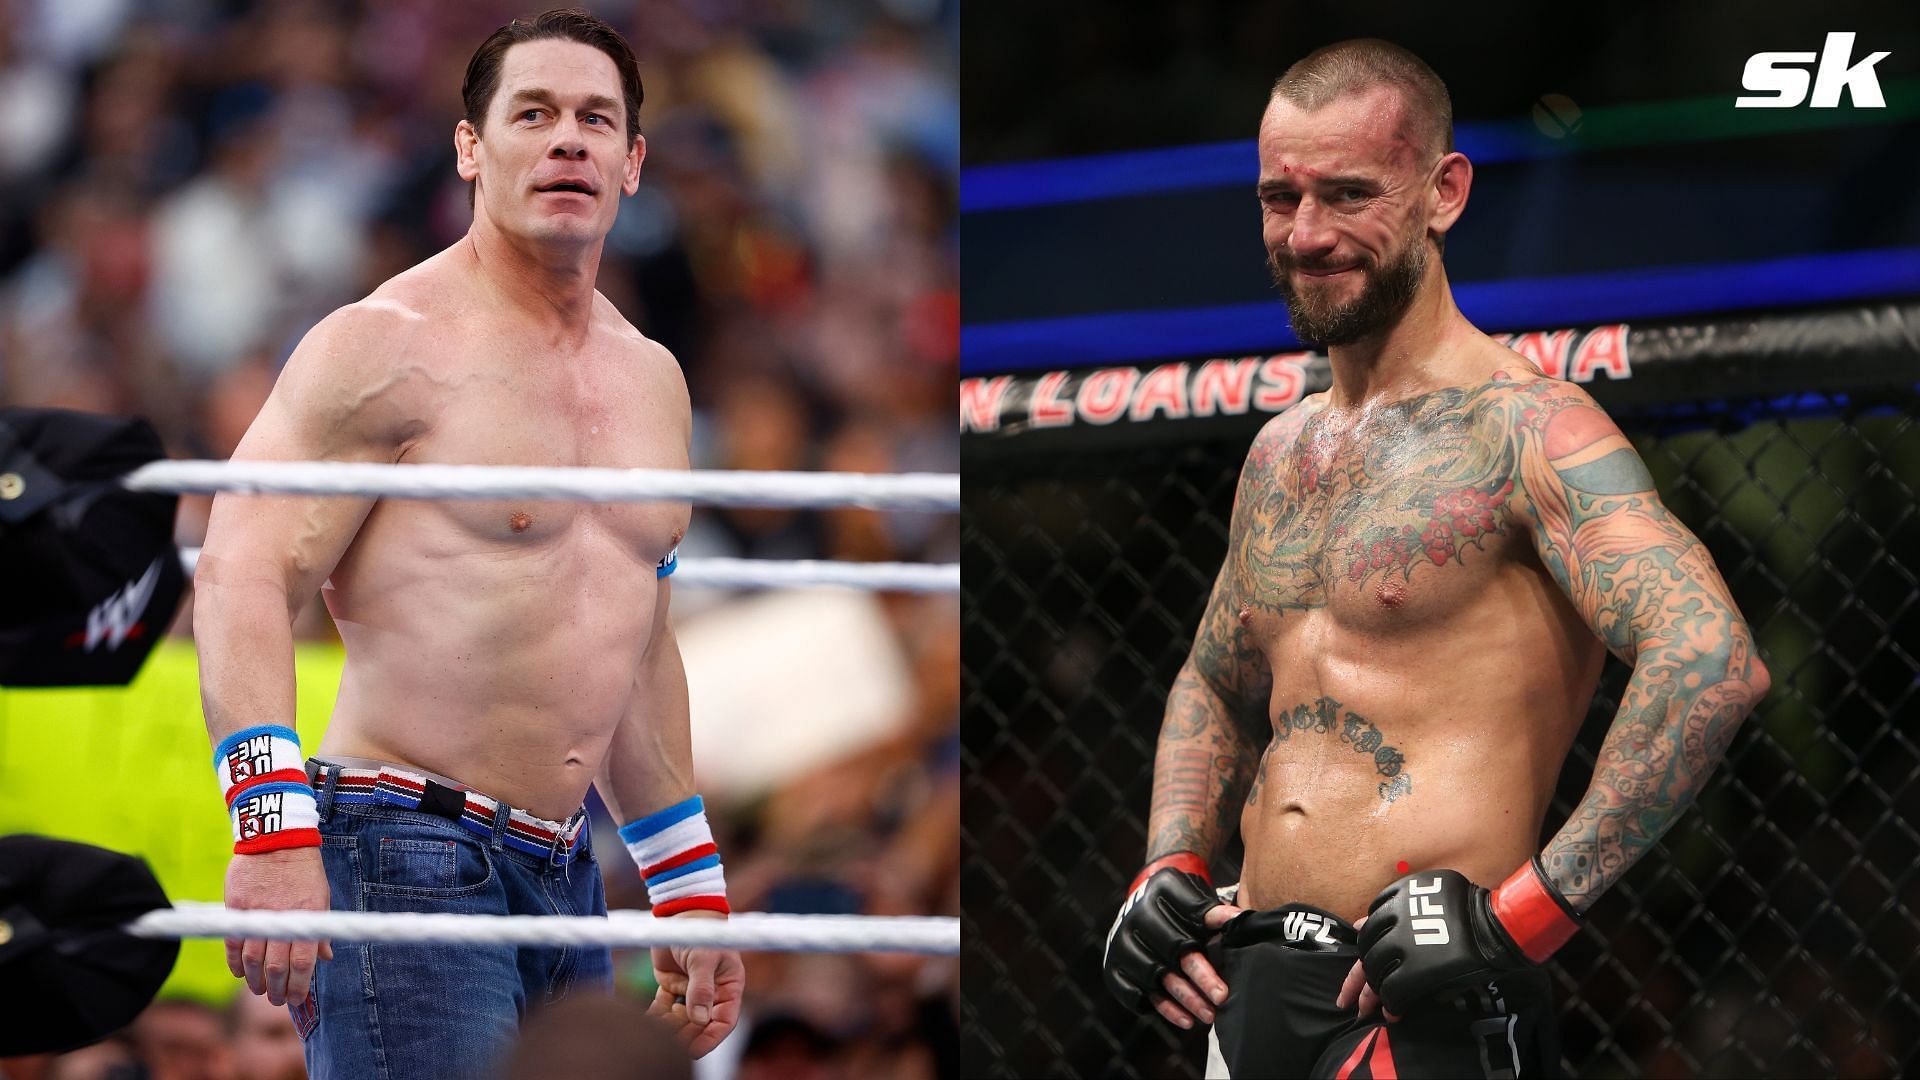 Wrestler CM Punk derrided his adversary John Cena about being a fan of the Boston Red Sox in 2011